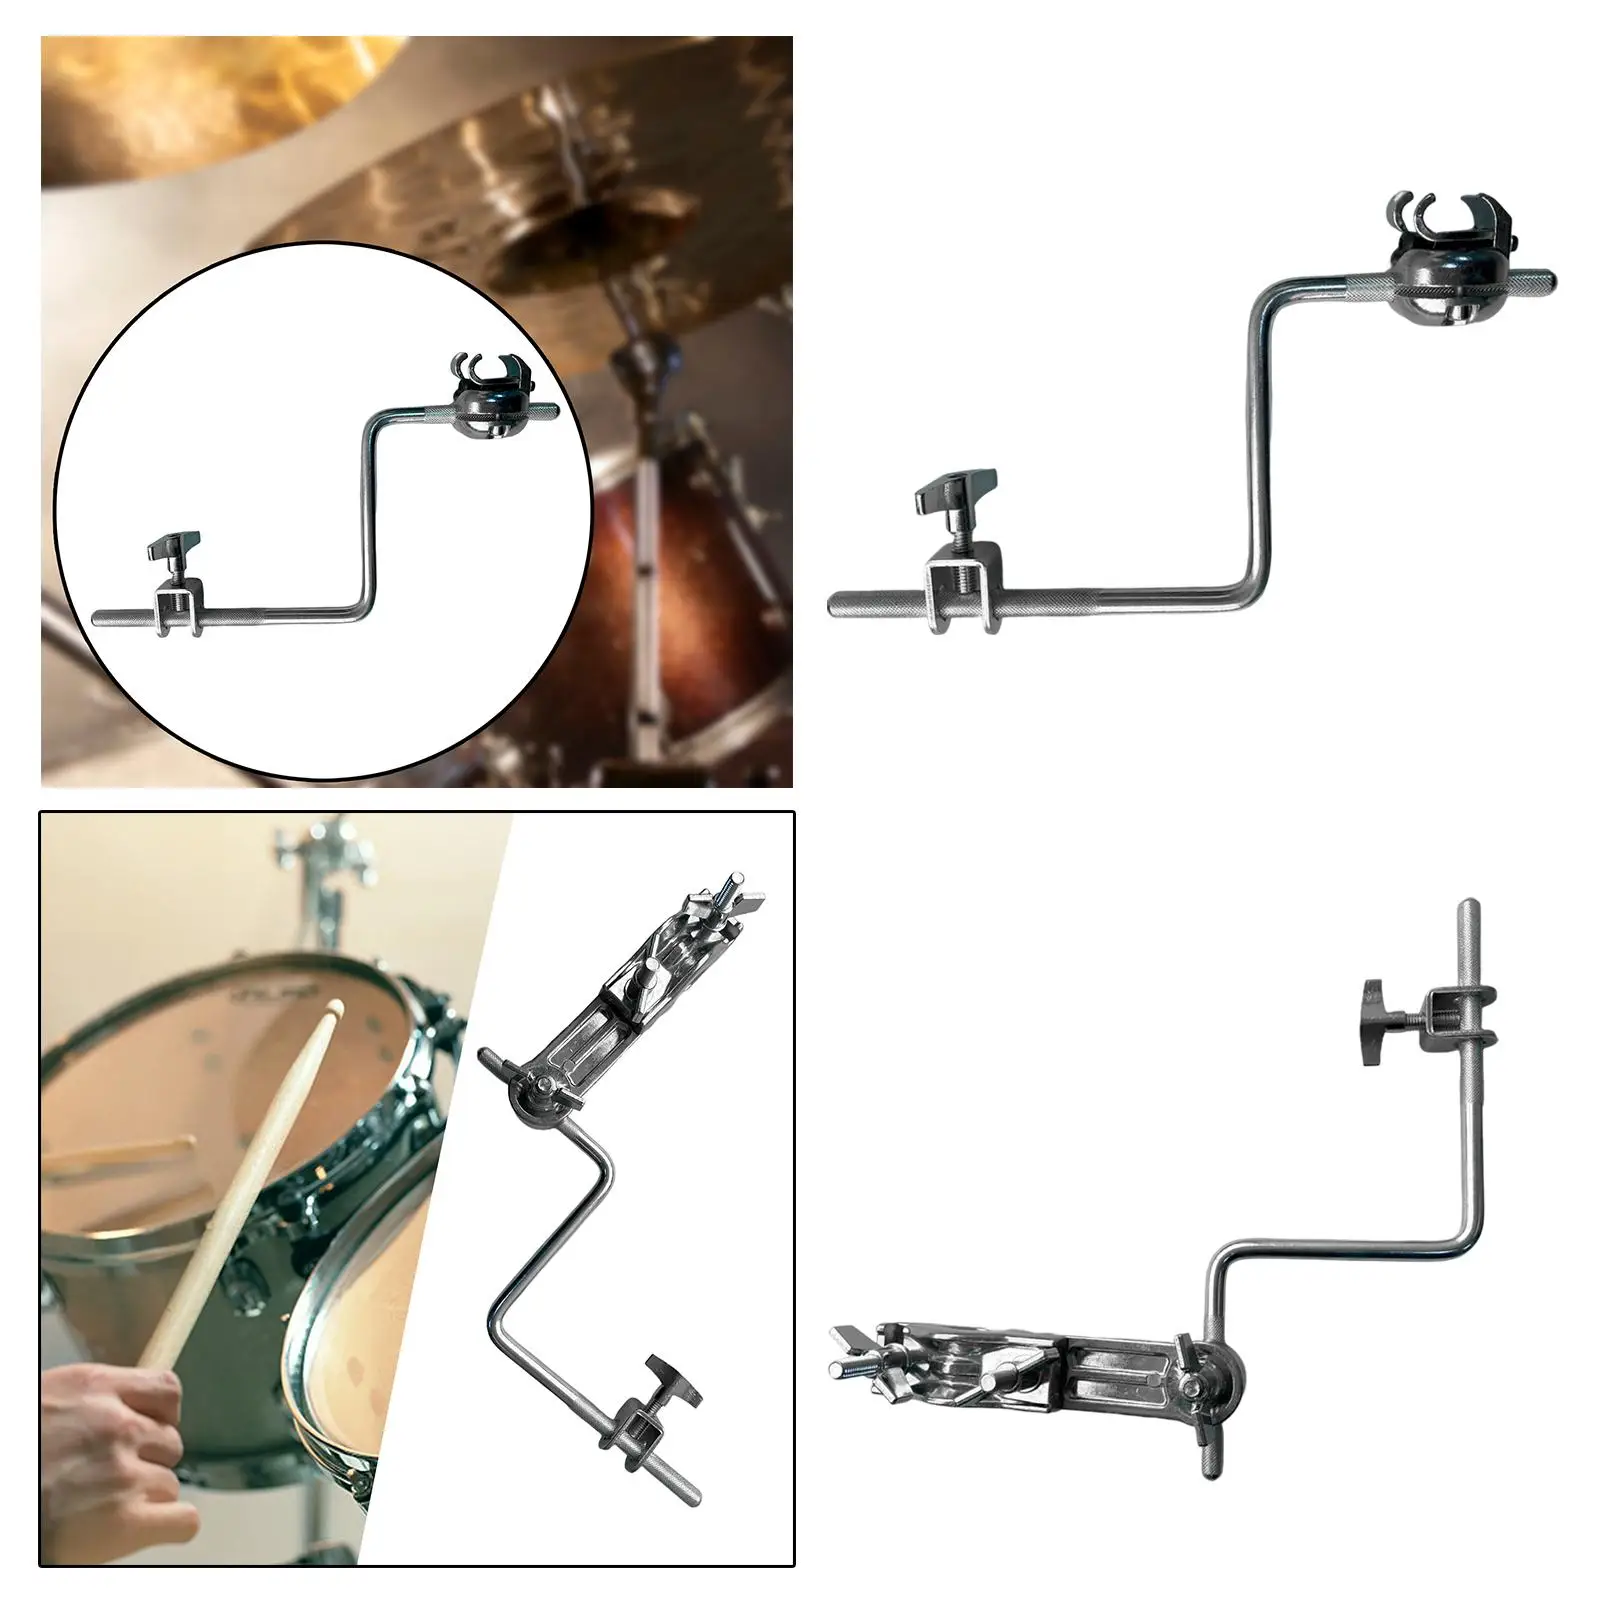 Bass Drum Cowbell Clamp Bracket Sturdy Accessory Jazz Drum Replacement Stainless Steel Hardware Durable Support Stand Adjustable